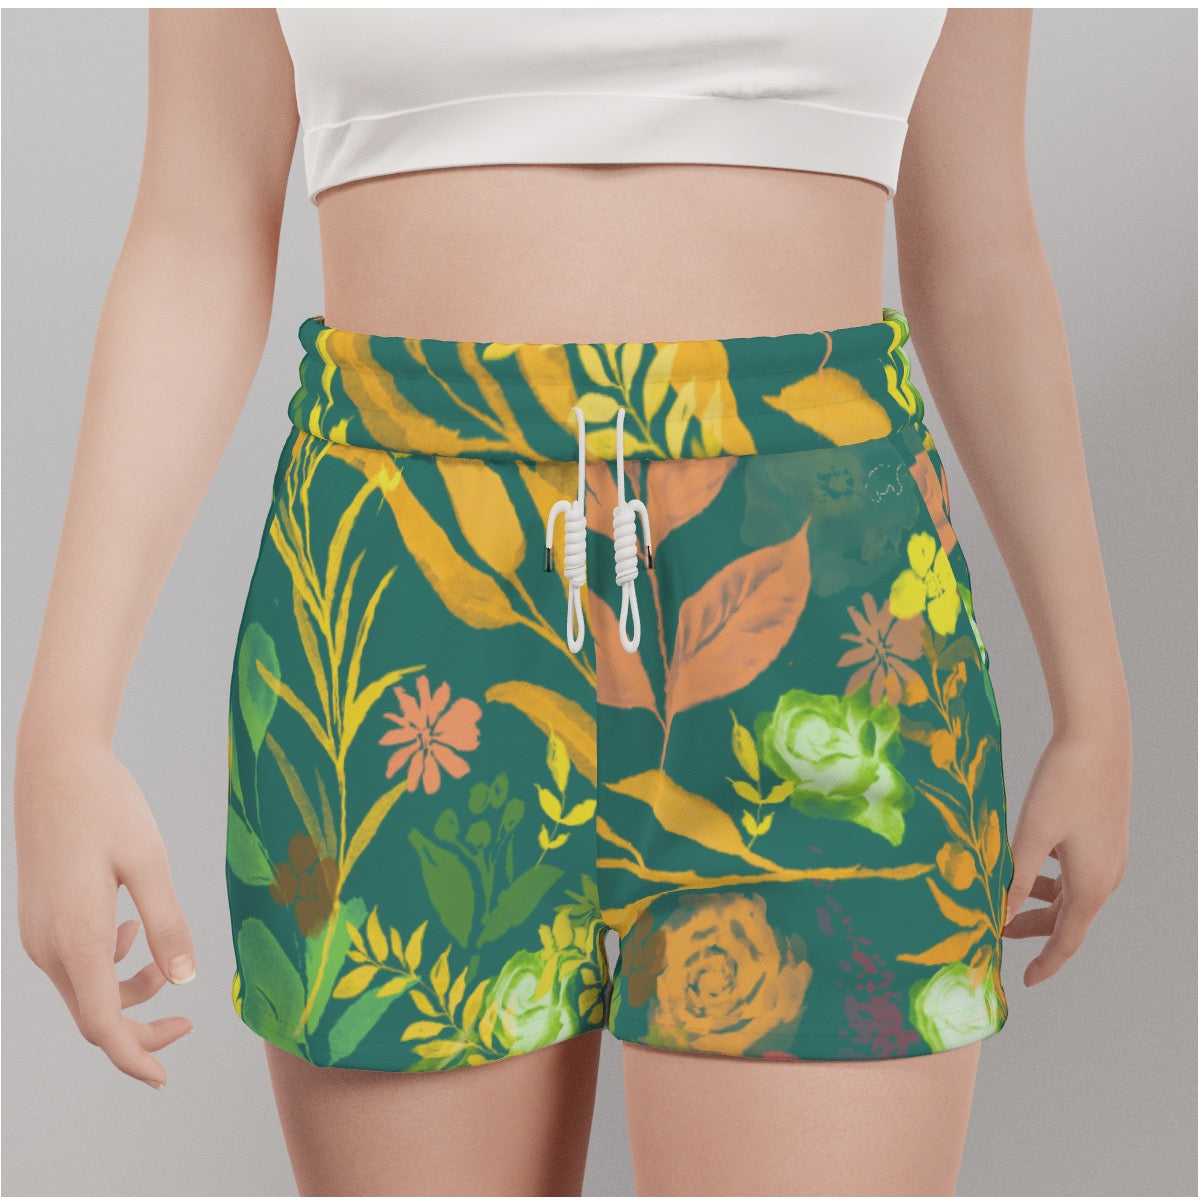 Multicolor Flowers Green Casual Shorts. Design hand-painted by the Designer Maria Alejandra Echenique